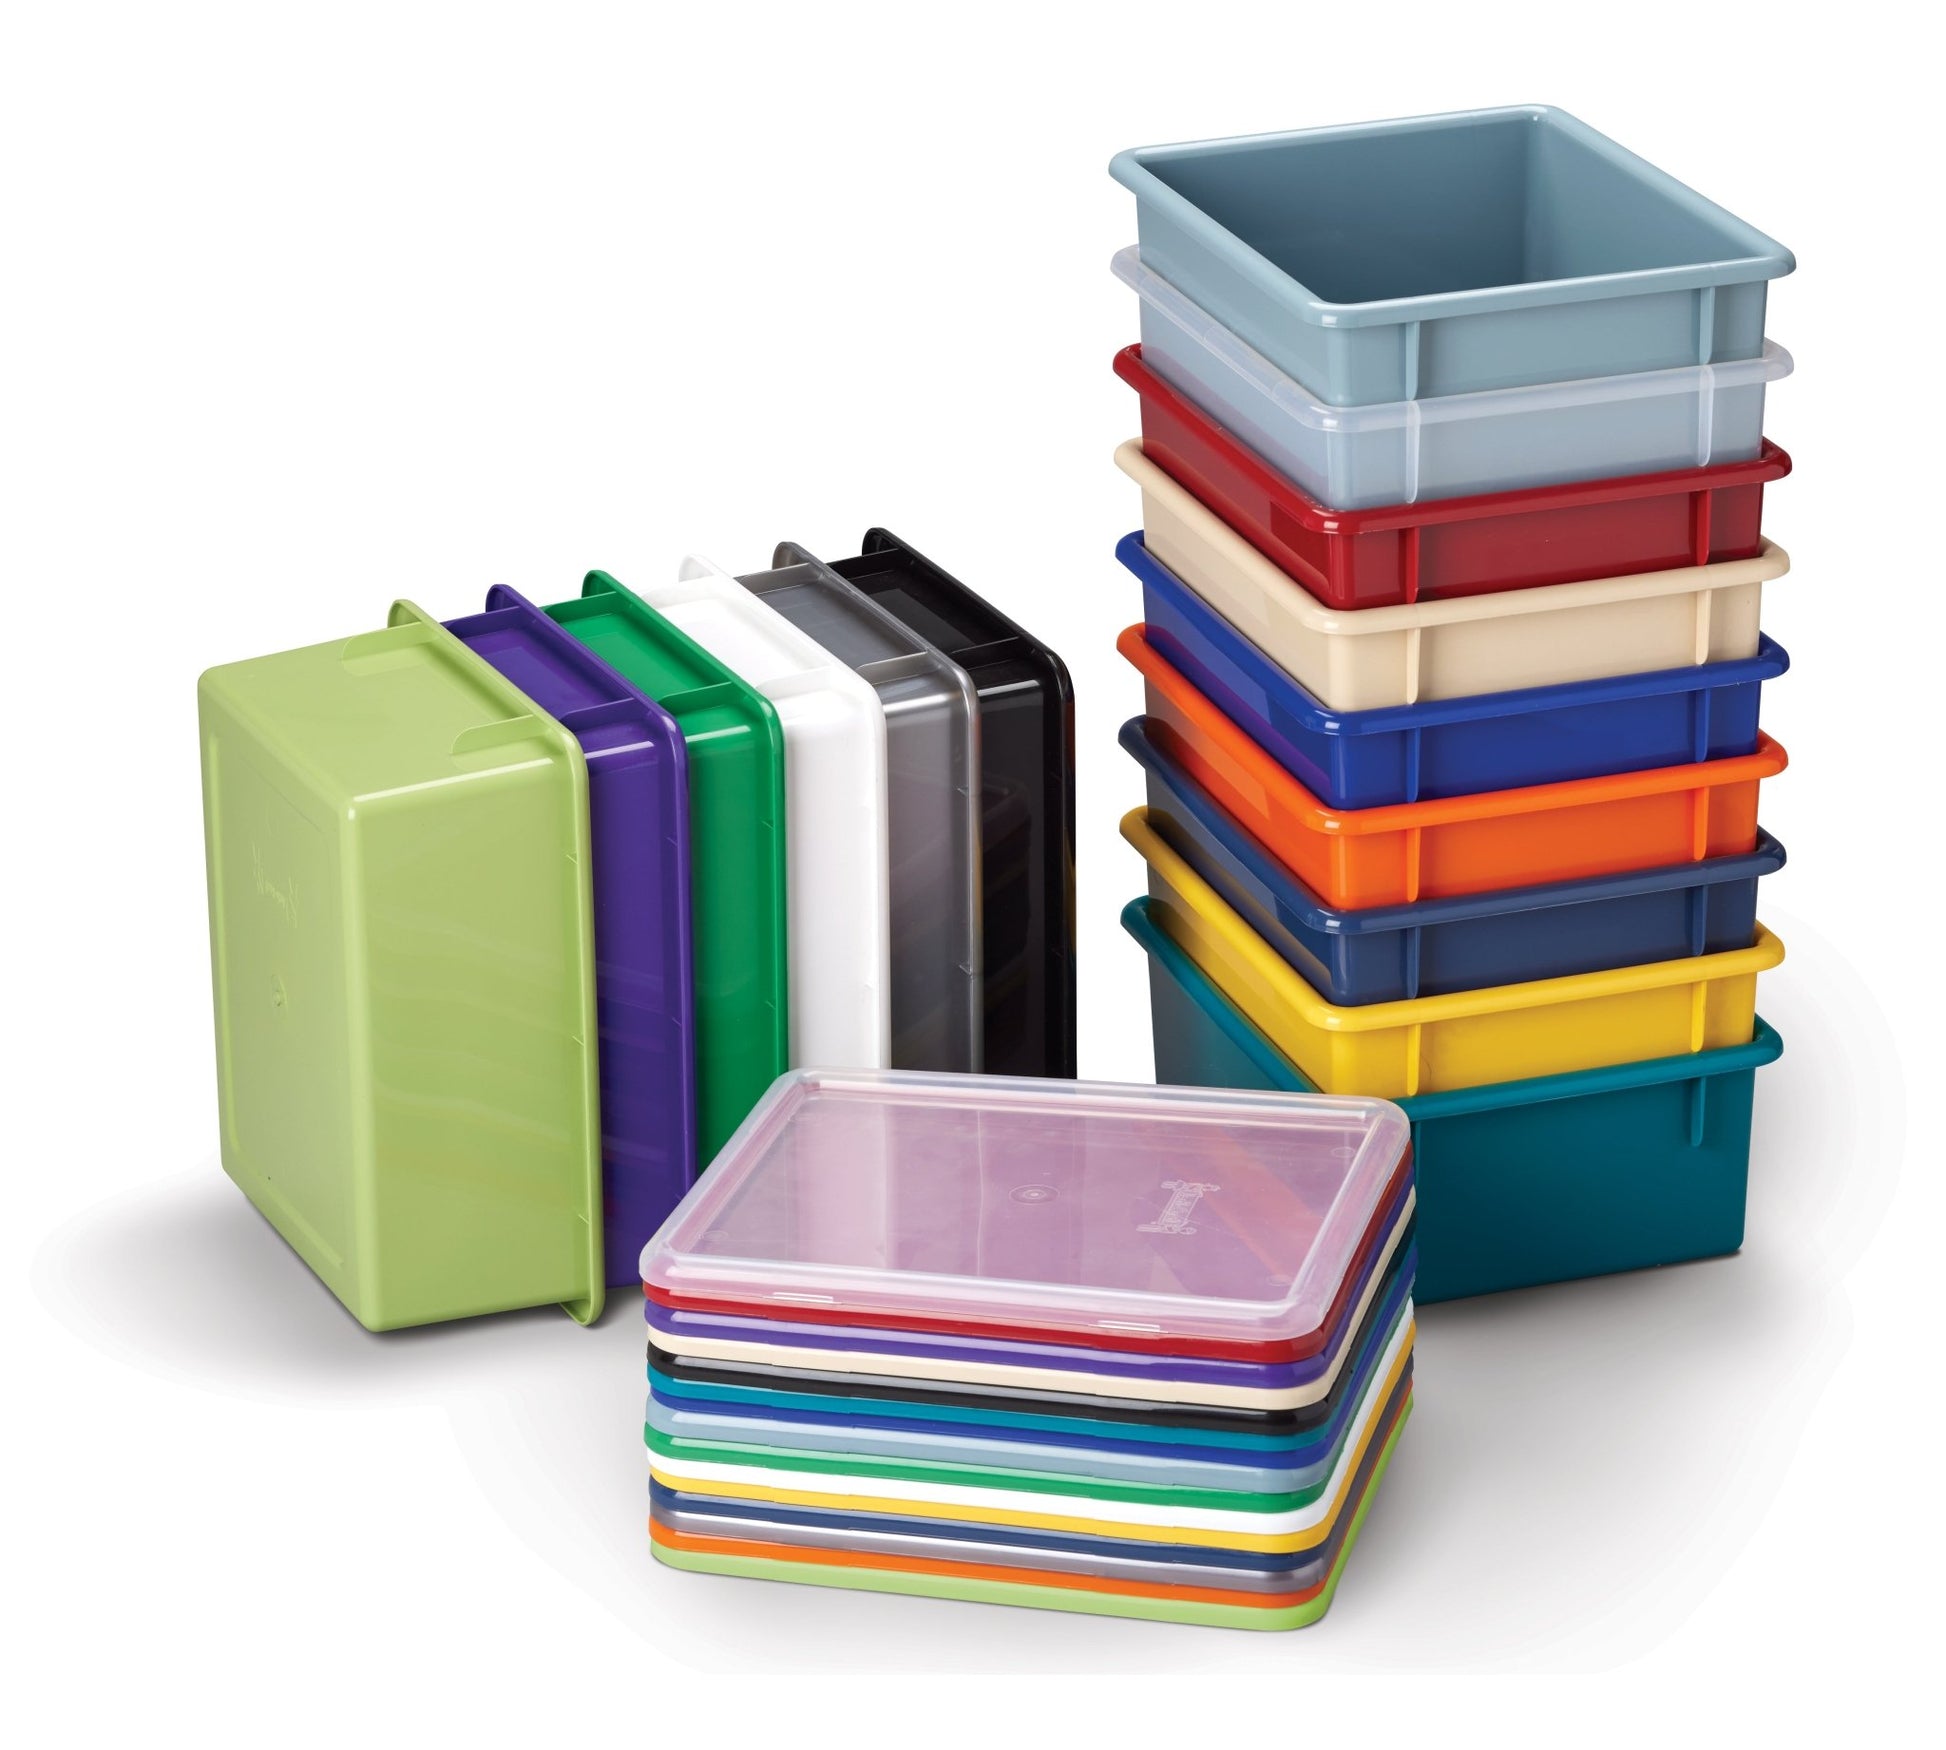 Jonti-Craft Building Table With Duplo Compatible Top- Colored Storage Tubs (Jonti-Craft JON-57459JC) - SchoolOutlet